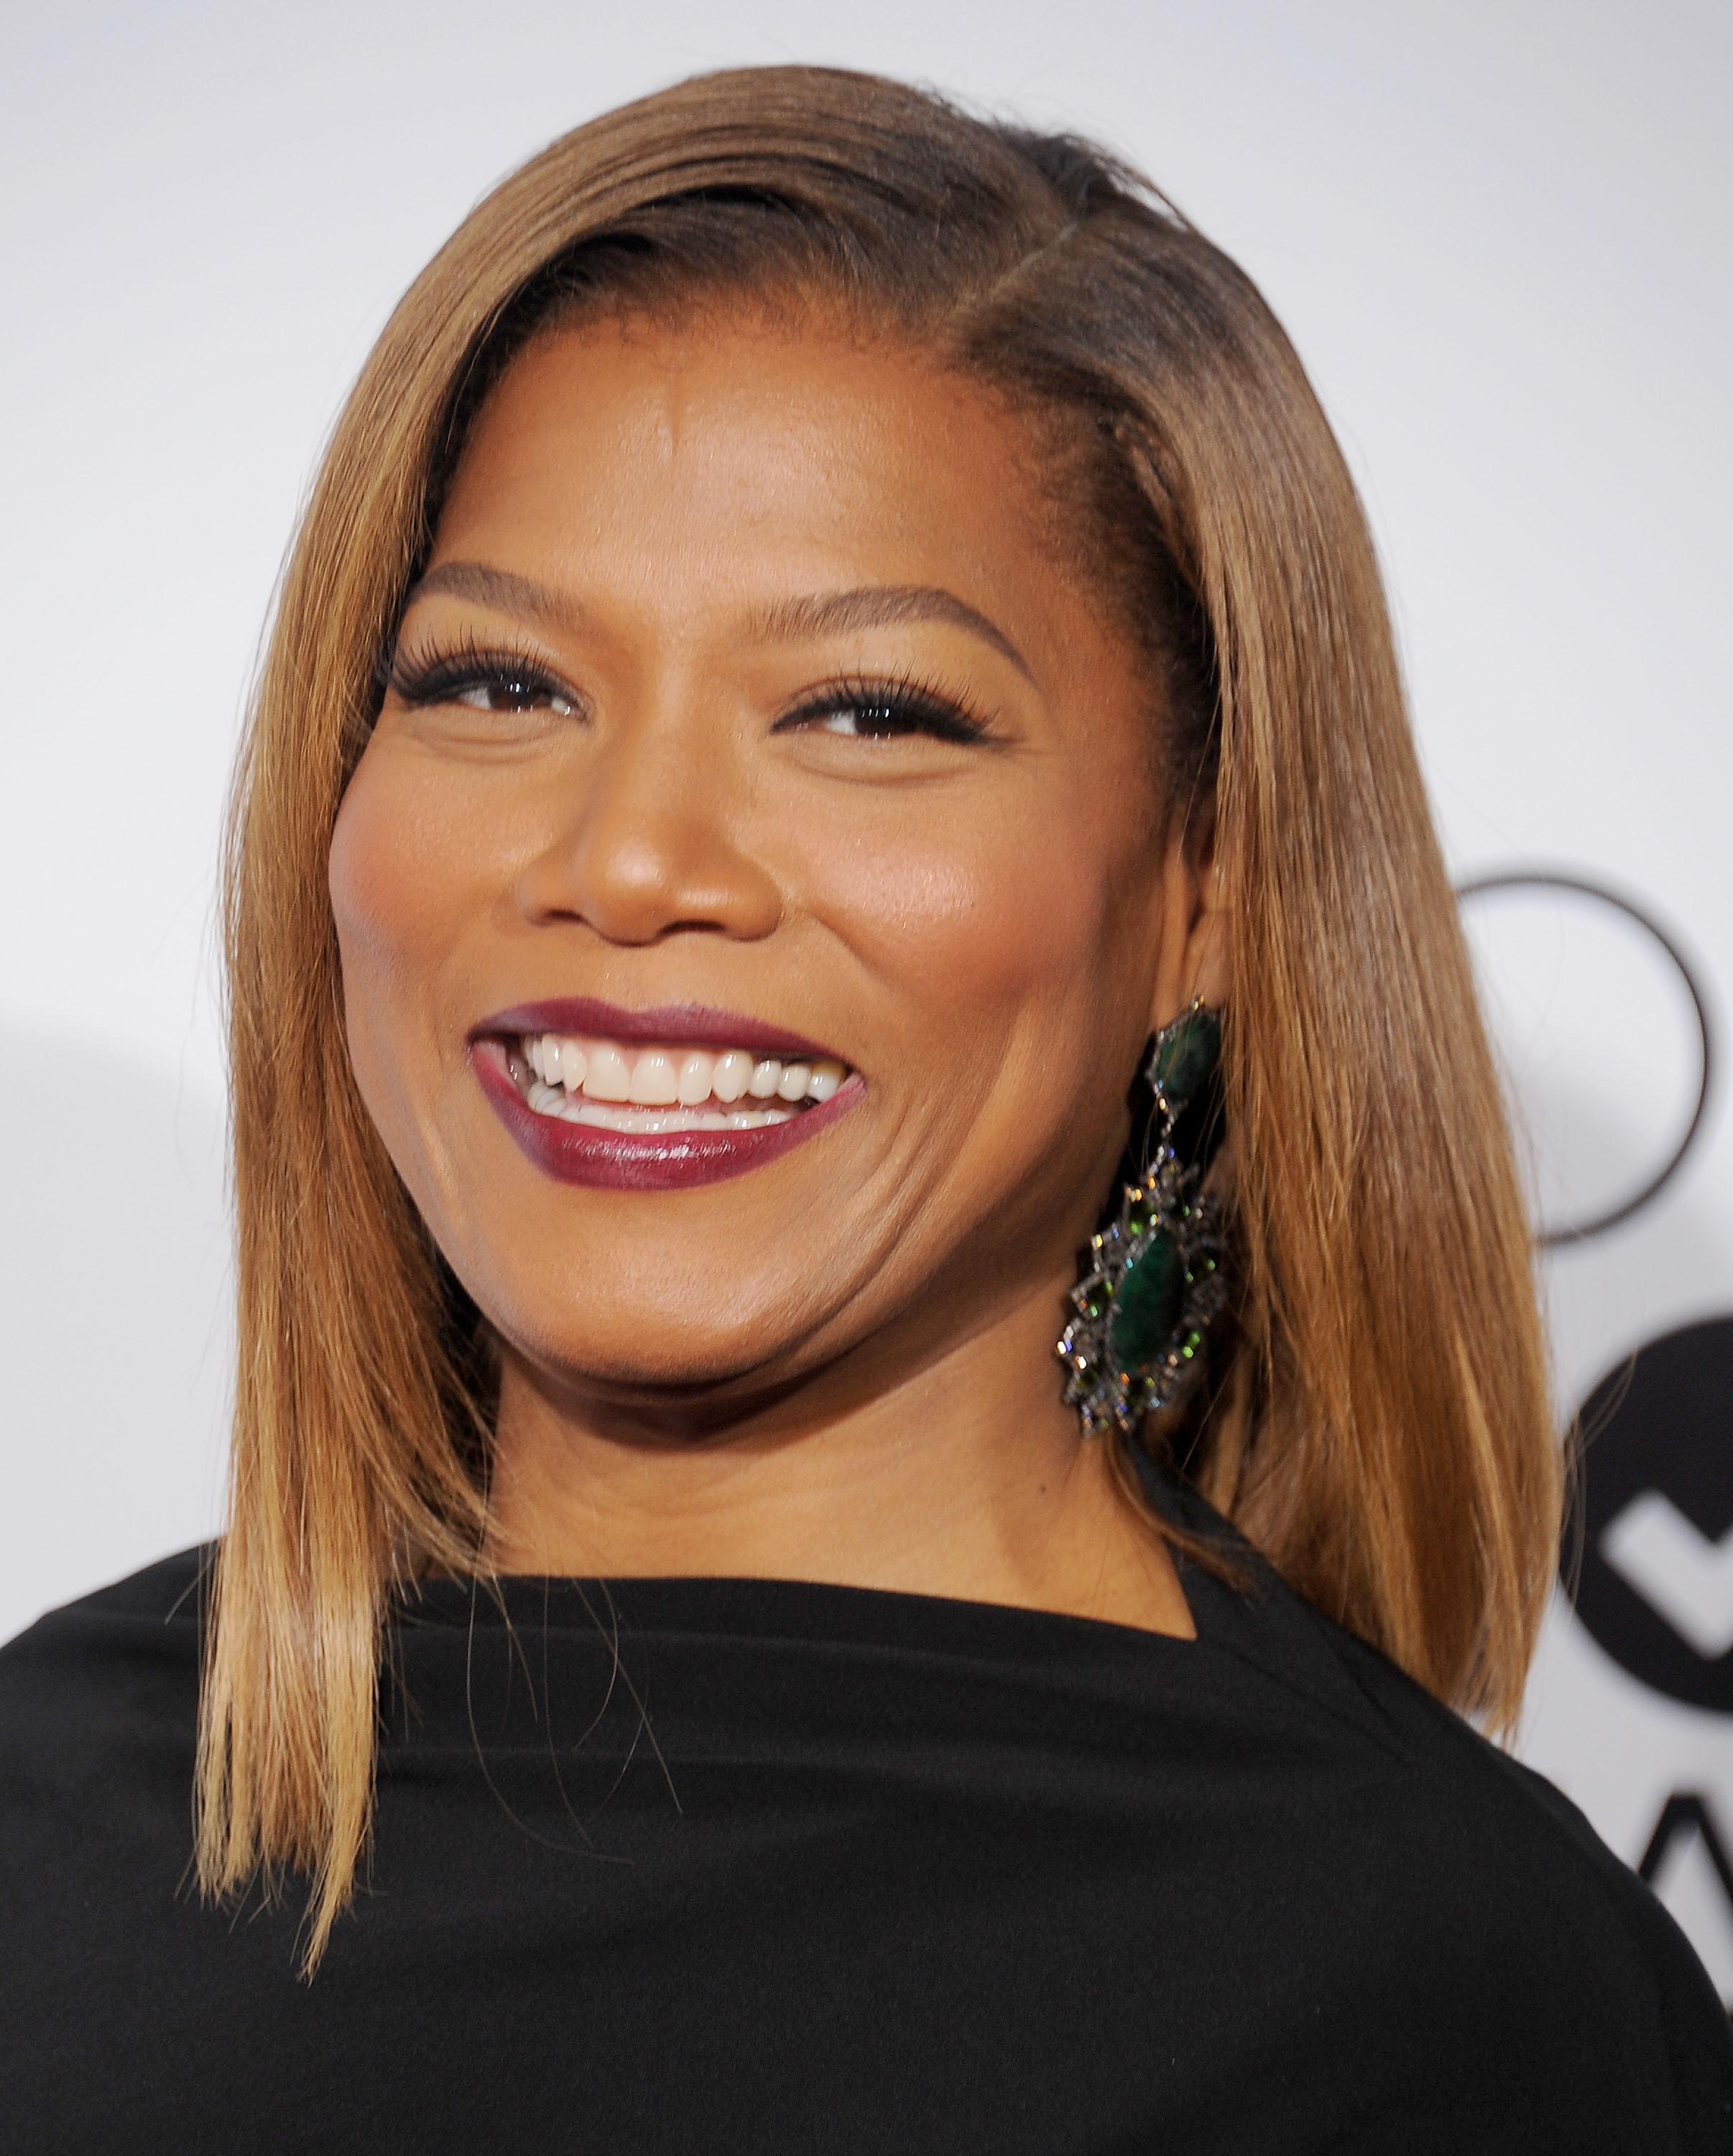 Queen Latifah Receives Honorary Doctorate Degree | 101.1 The Wiz